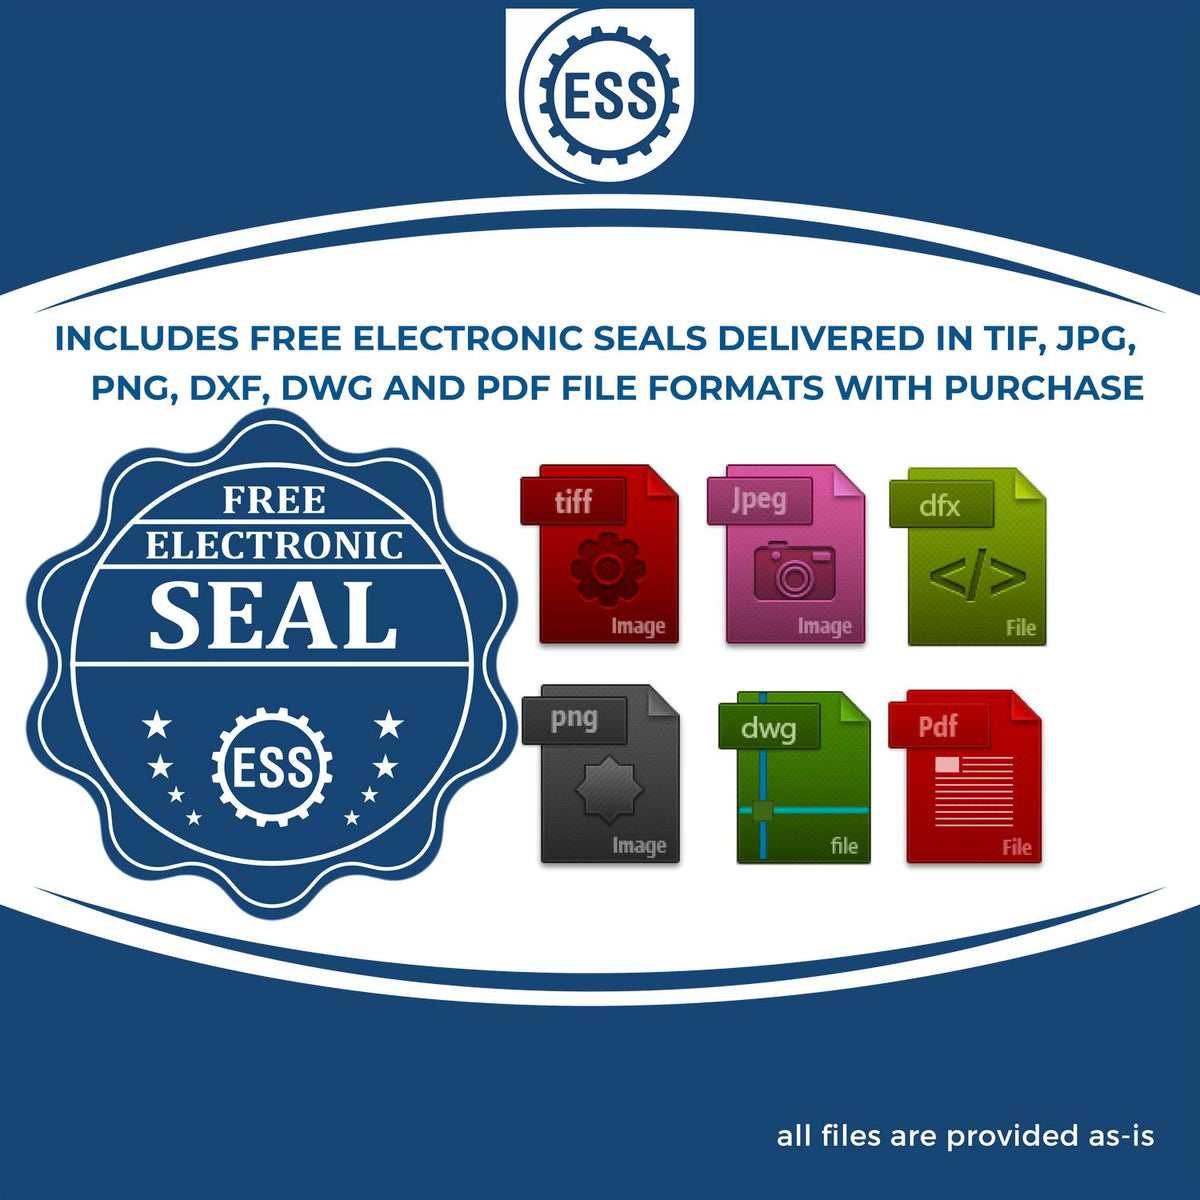 An infographic for the free electronic seal for the Hybrid Alaska Geologist Seal illustrating the different file type icons such as DXF, DWG, TIF, JPG and PNG.